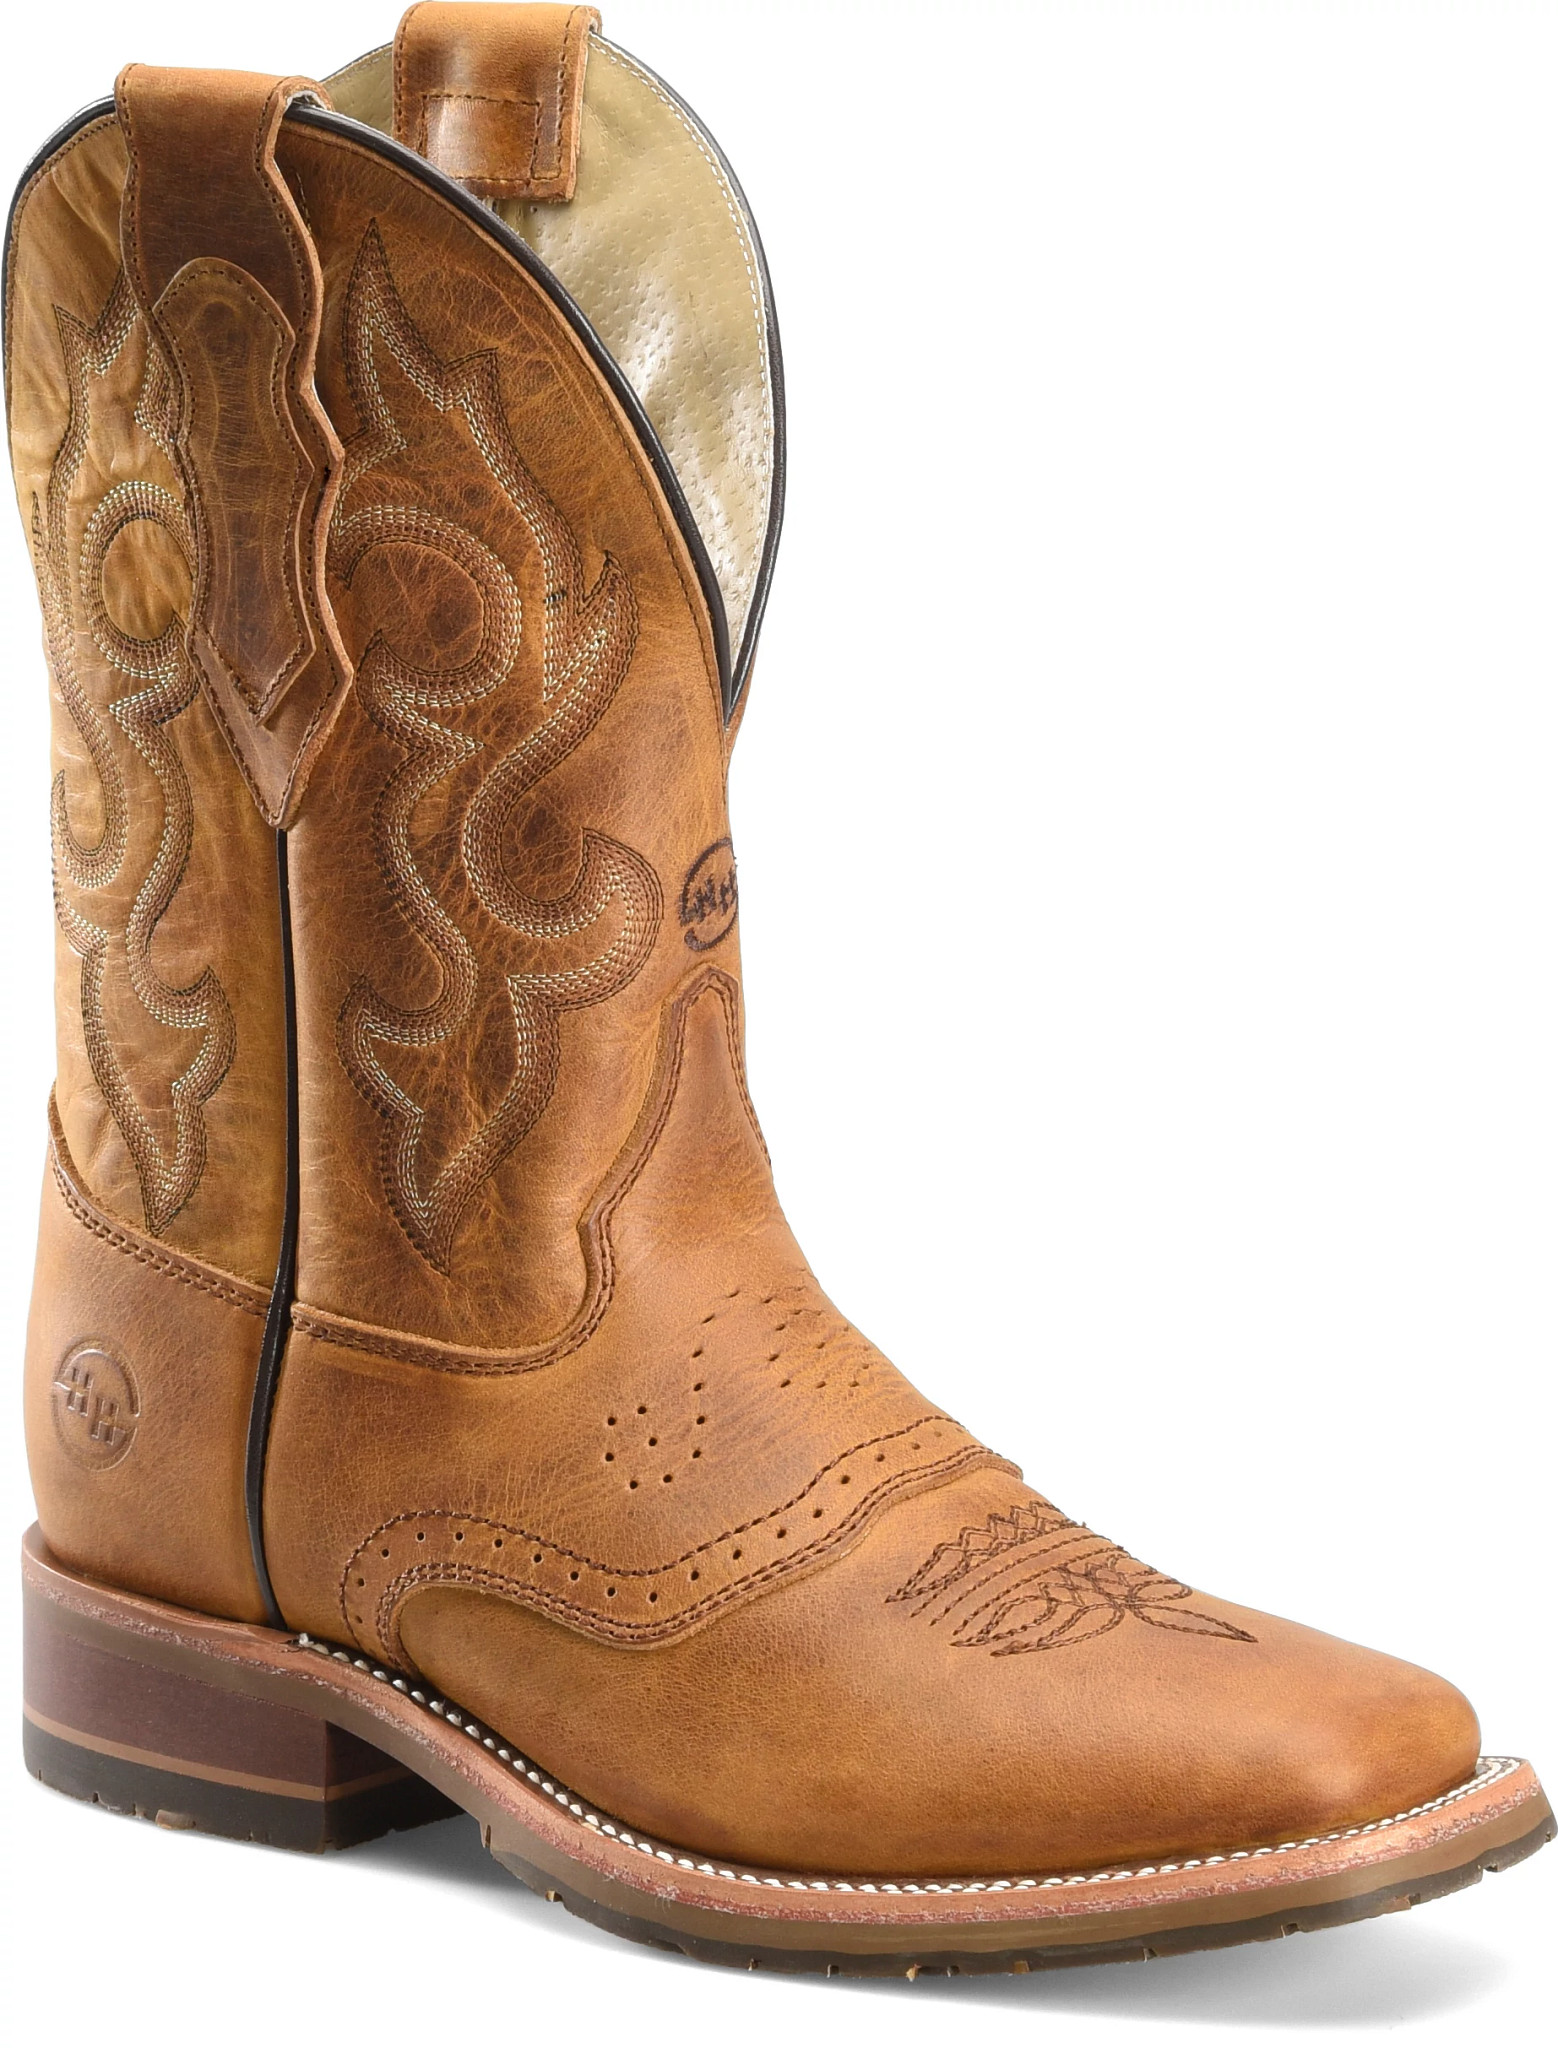 Men's Boots and Footwear | Double-H Boots